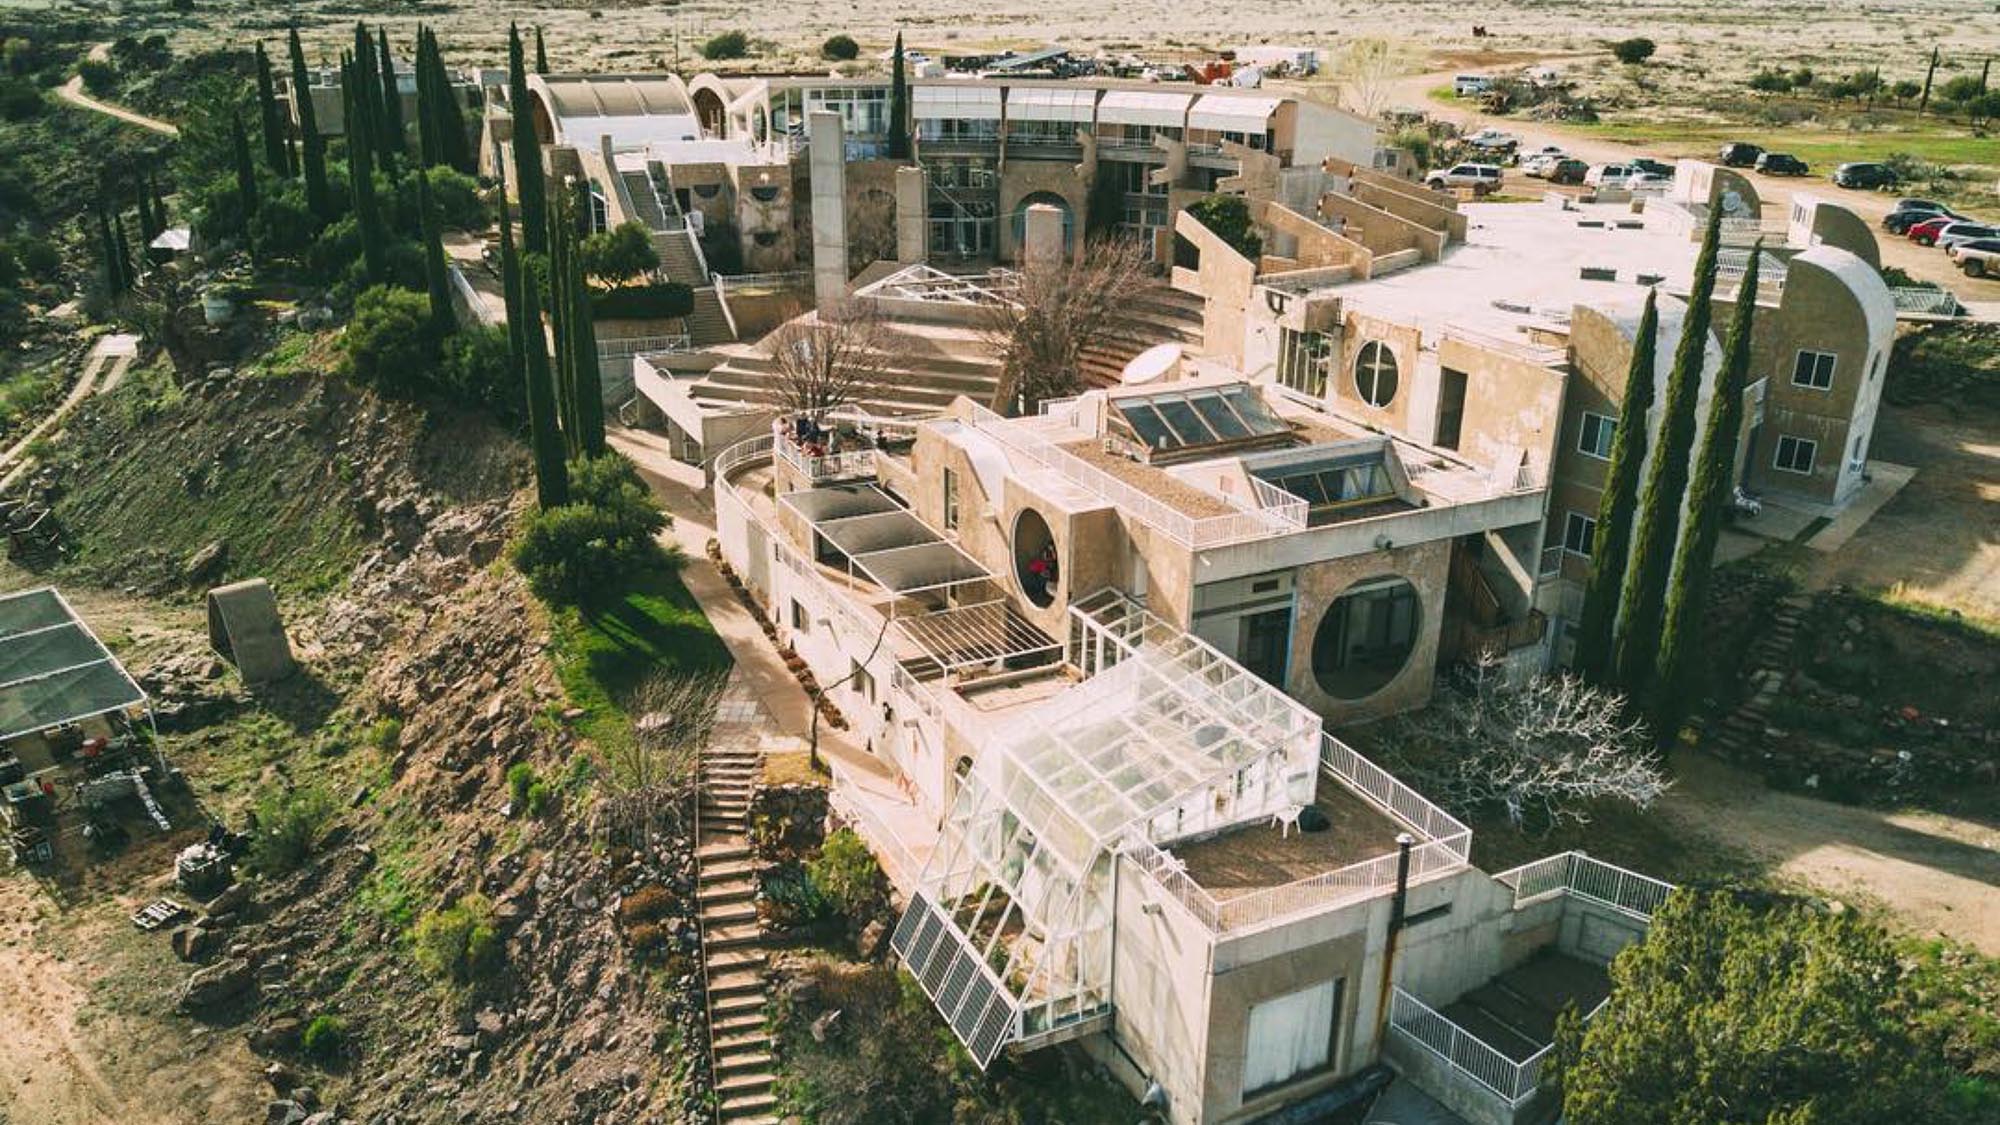 FORM FESTIVAL VENUE: 5 THINGS ABOUT ARCOSANTI, ARIZONA - Furthermore